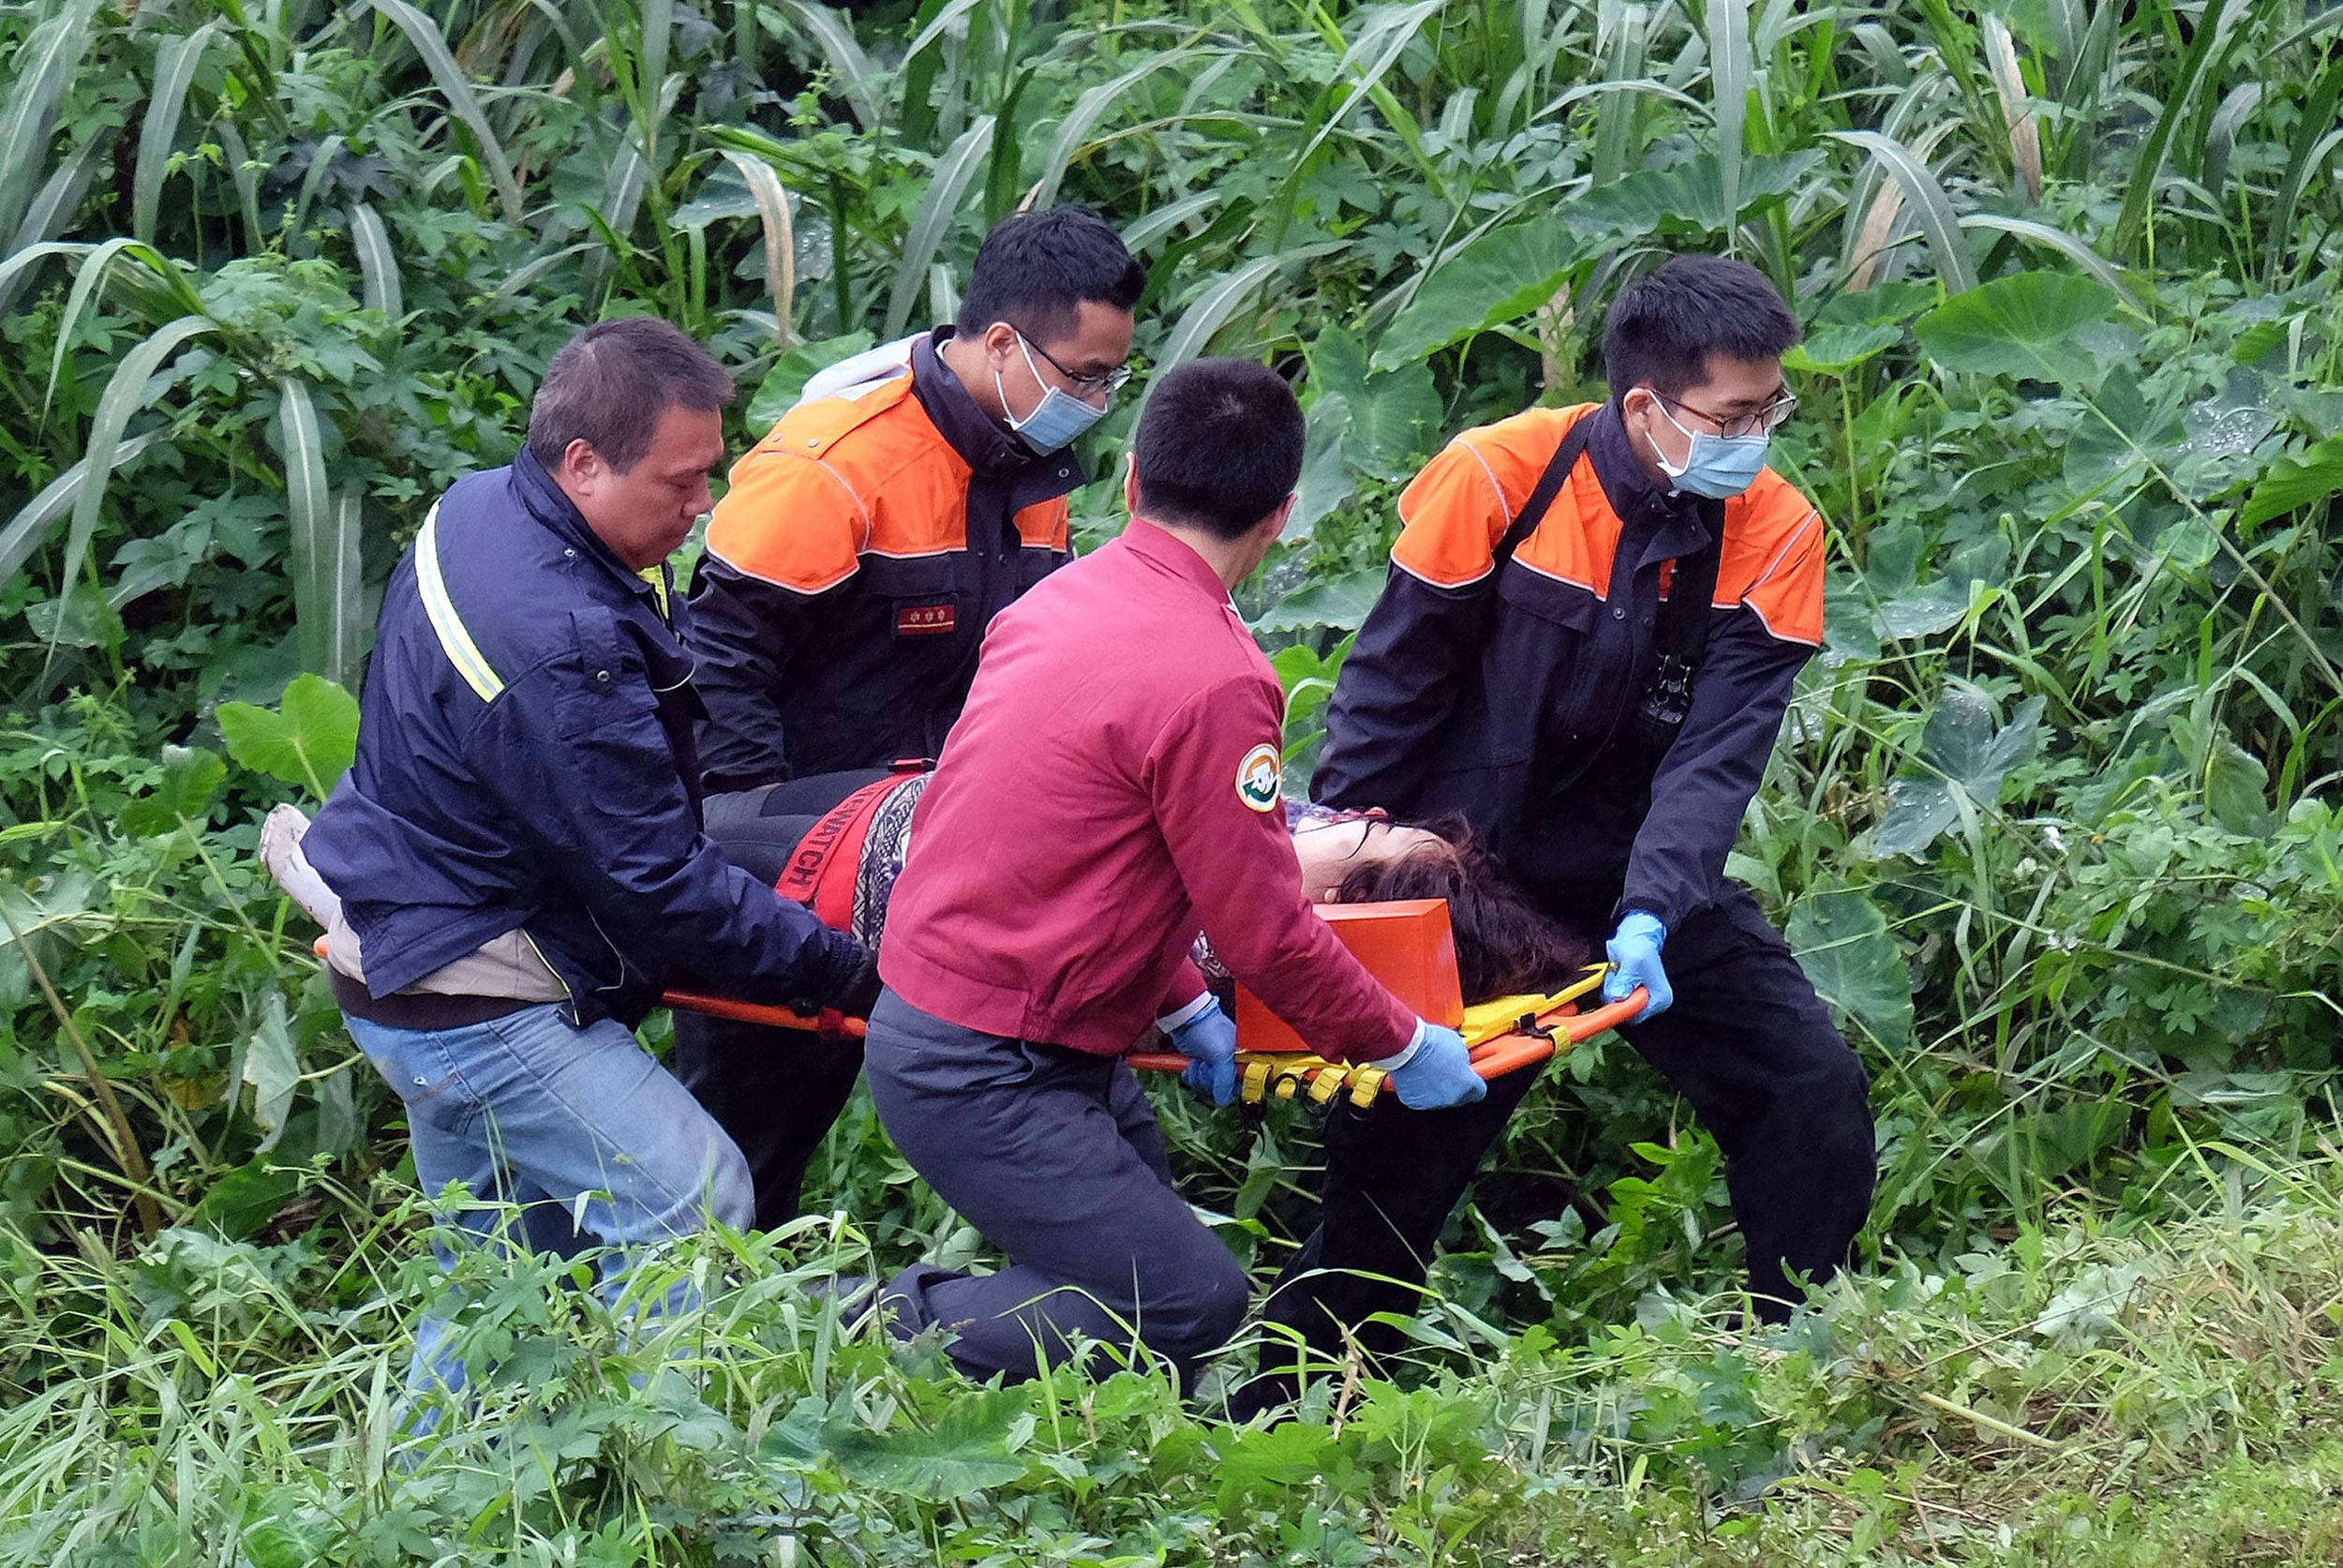 An injured passenger (C) is carried on a stretcher by emergency personnel up the river bank after a TransAsia ATR 72-600 turboprop plane crash-landed into the Keelung river outside Taiwan's capital Taipei in New Taipei City on Feb. 4, 2015.